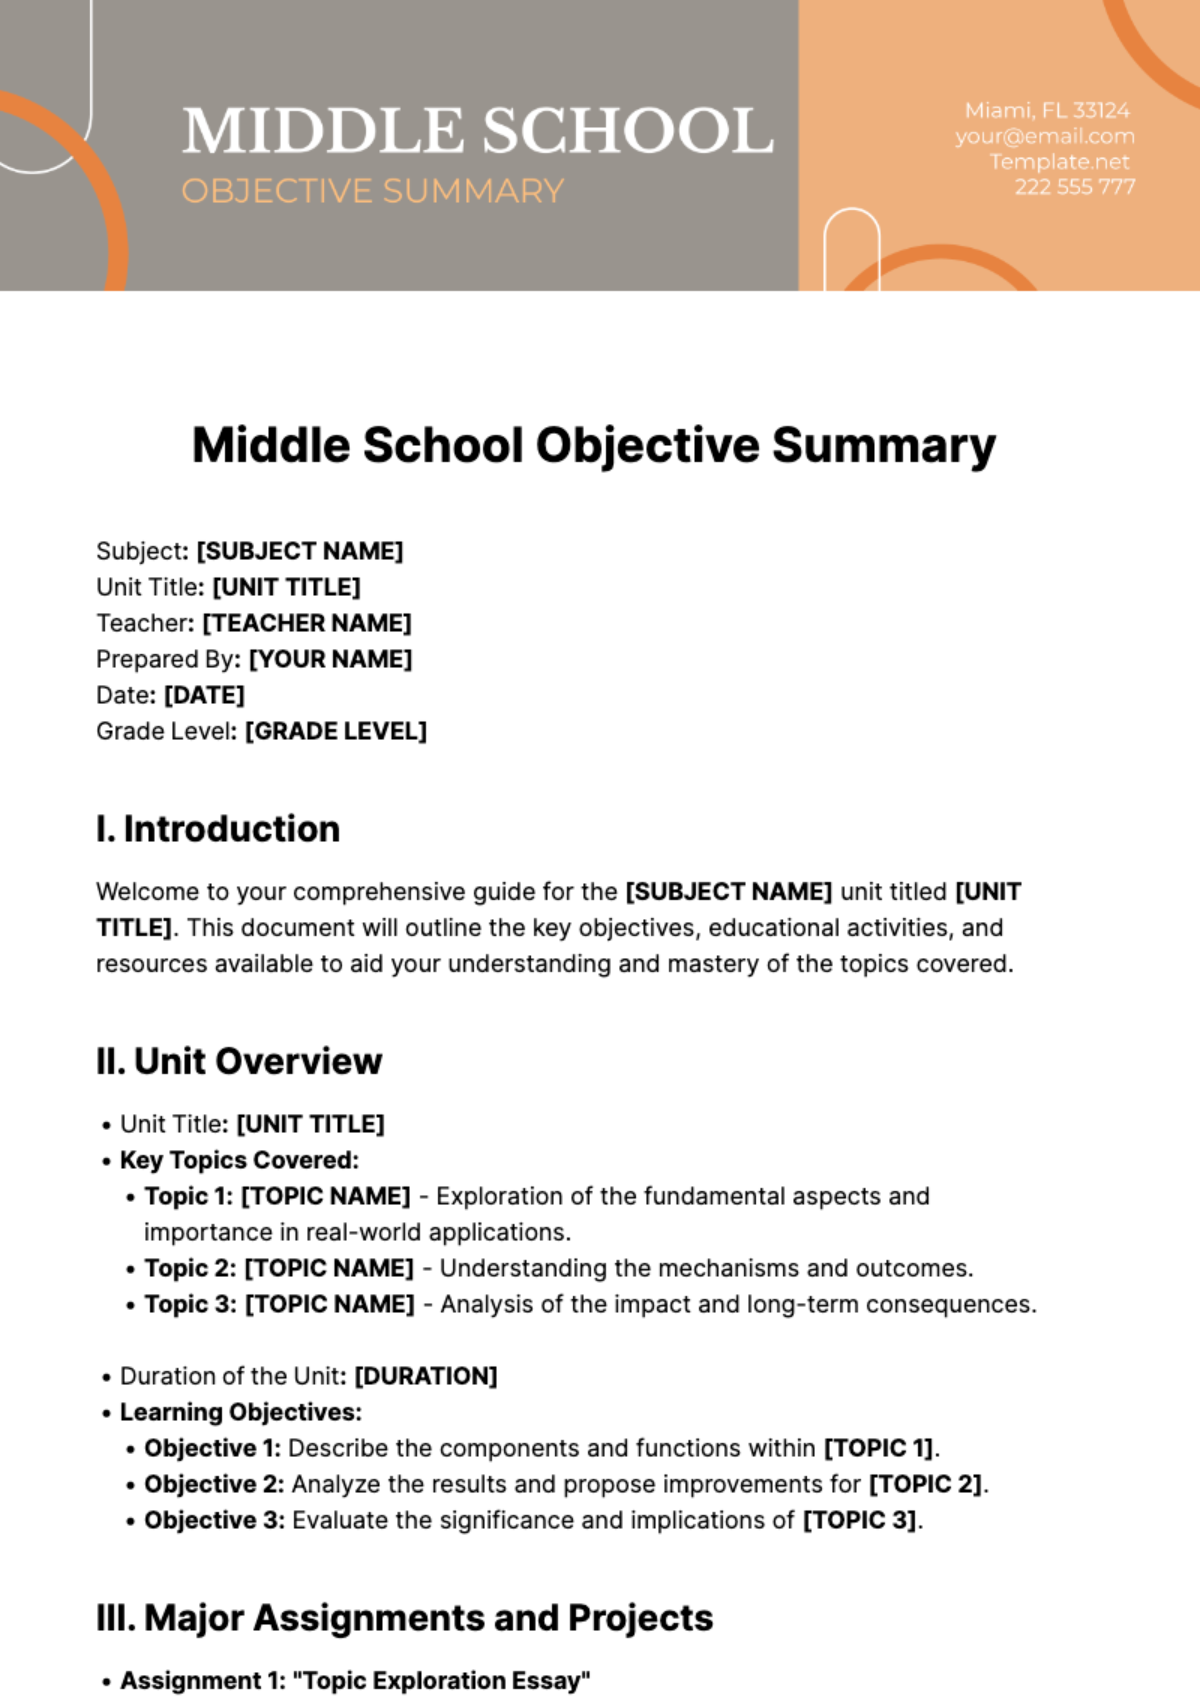 Free Middle School Objective Summary Template